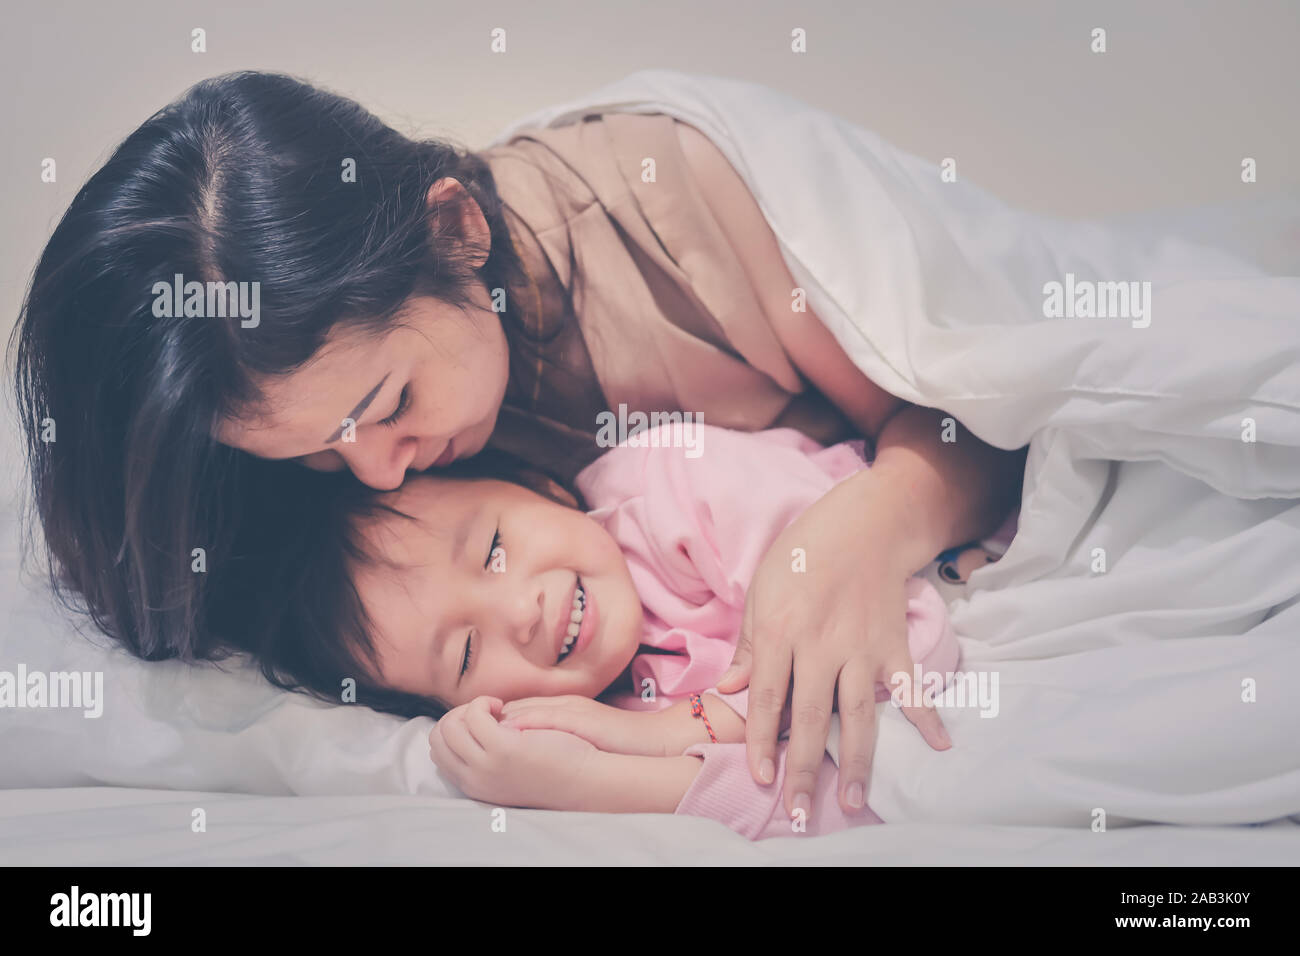 Mother gently kissing daughter wishing good night sweet dreams at night time soft focus happy family warm tone filter Stock Photo